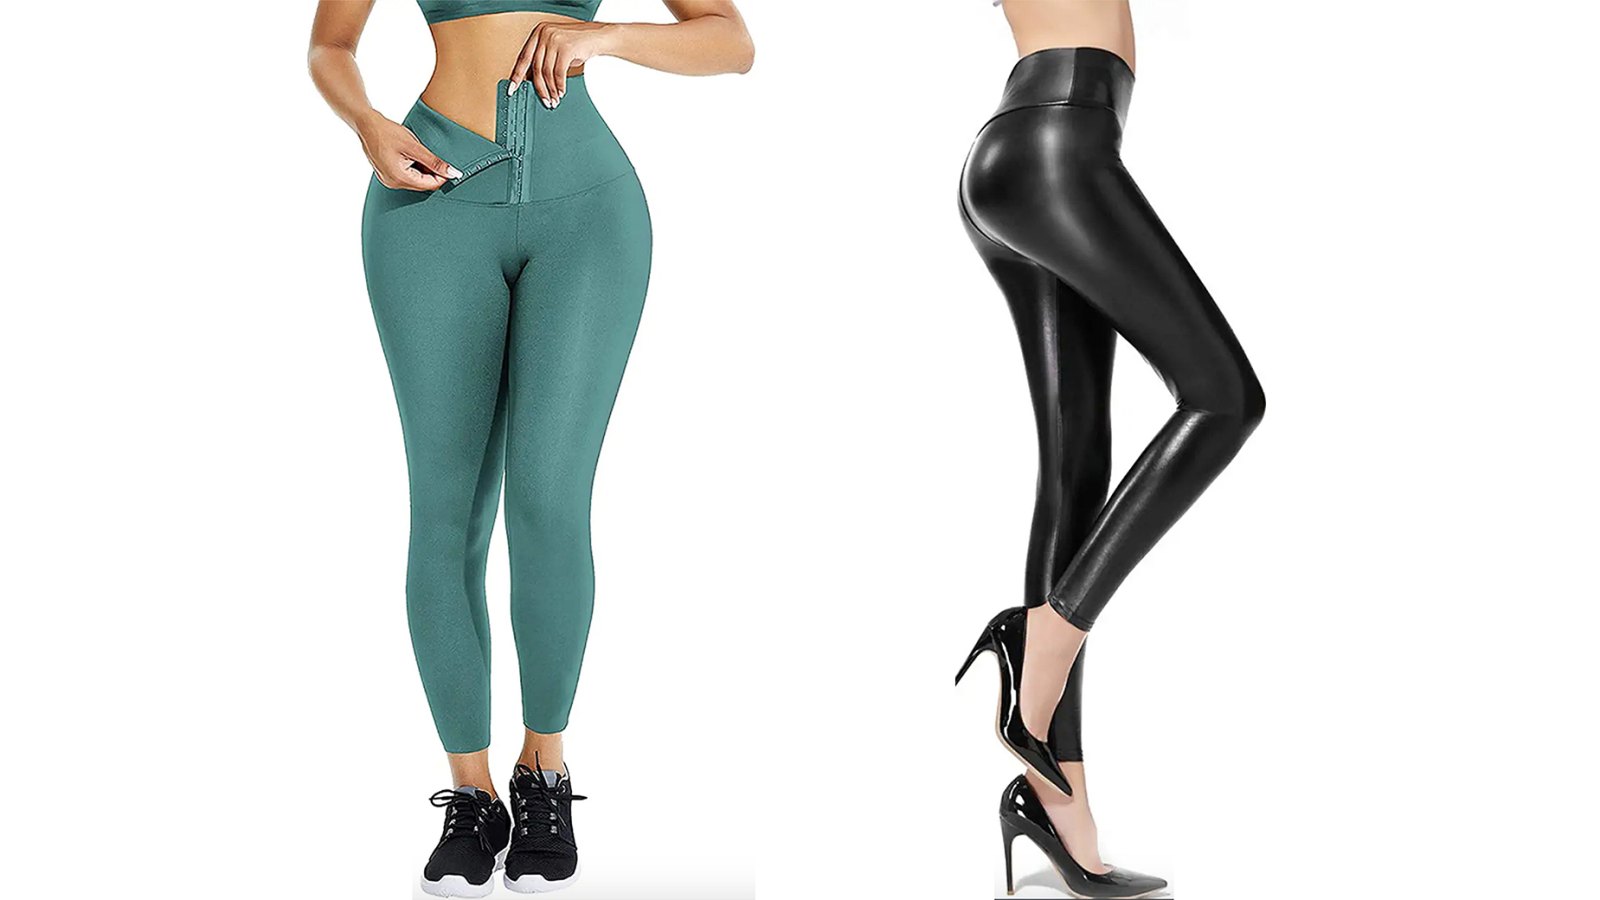 Glossy Transparent Flare Pants For Women Sexy Elastic Yoga, Pole